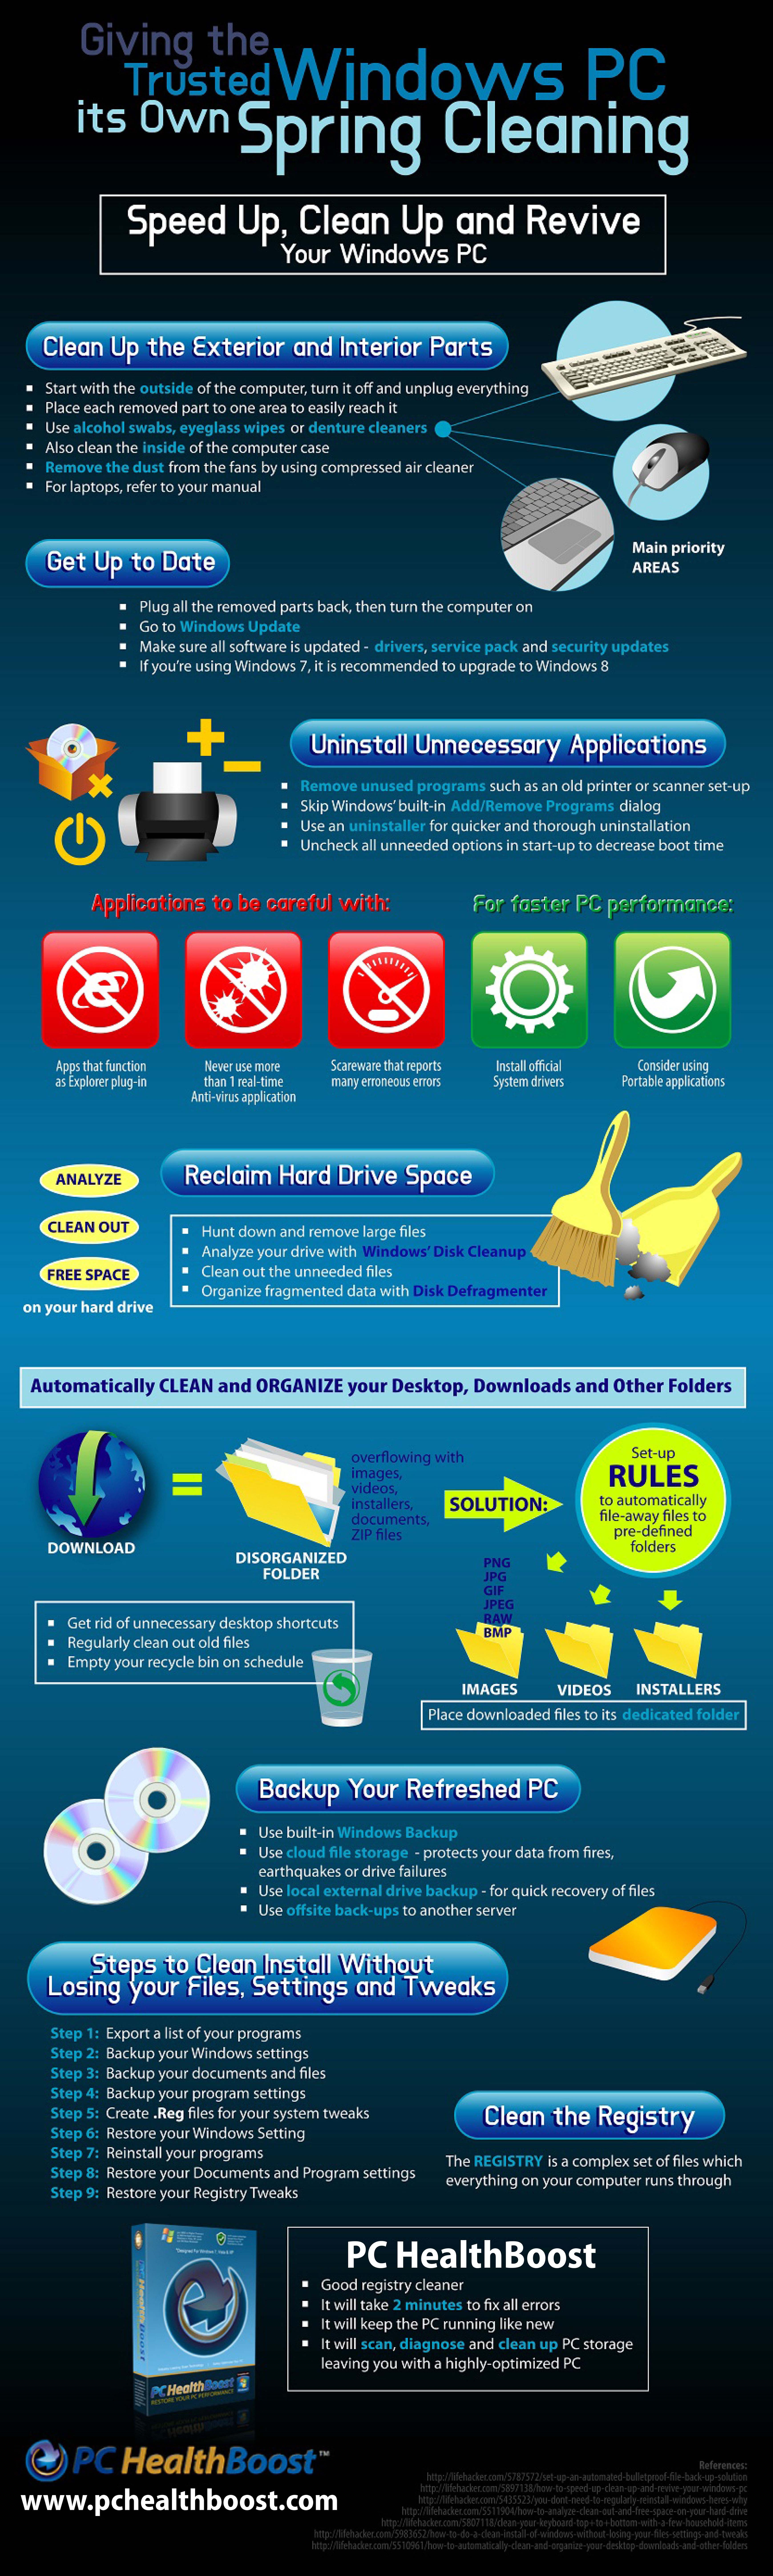 Clean Up PC Infographic from PC Health Boost